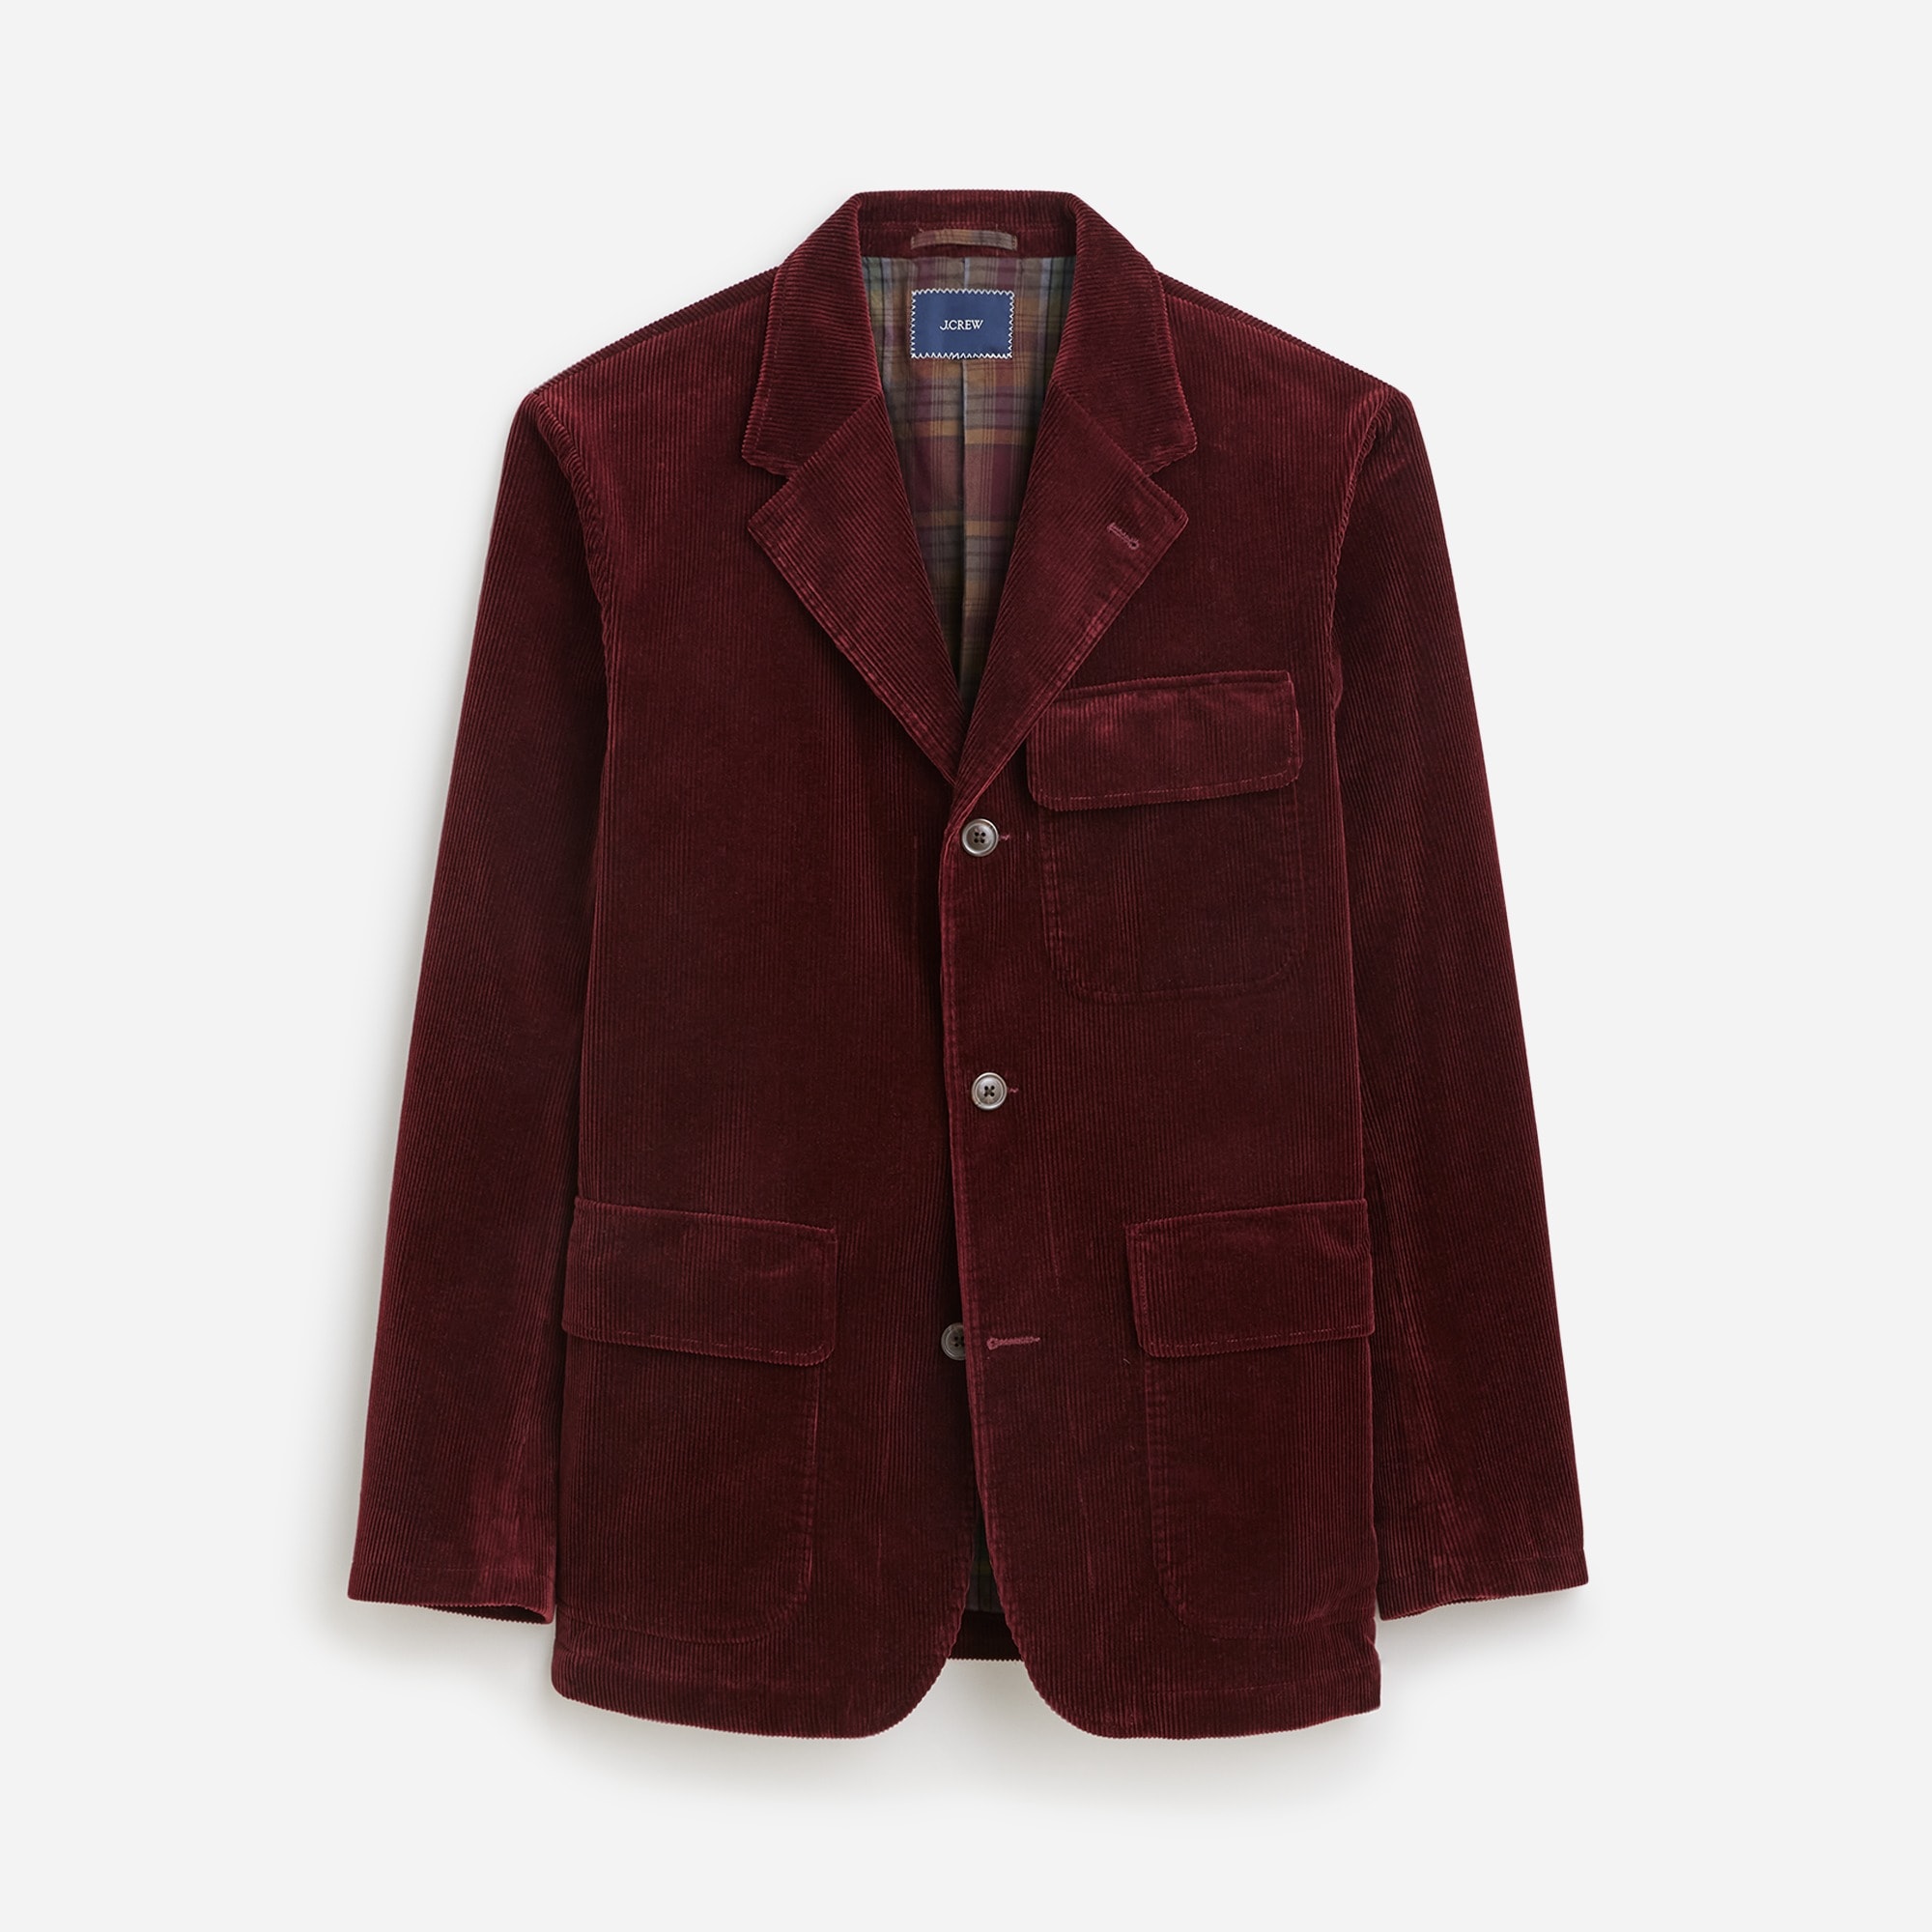 mens Relaxed-fit blazer in Italian cotton corduroy